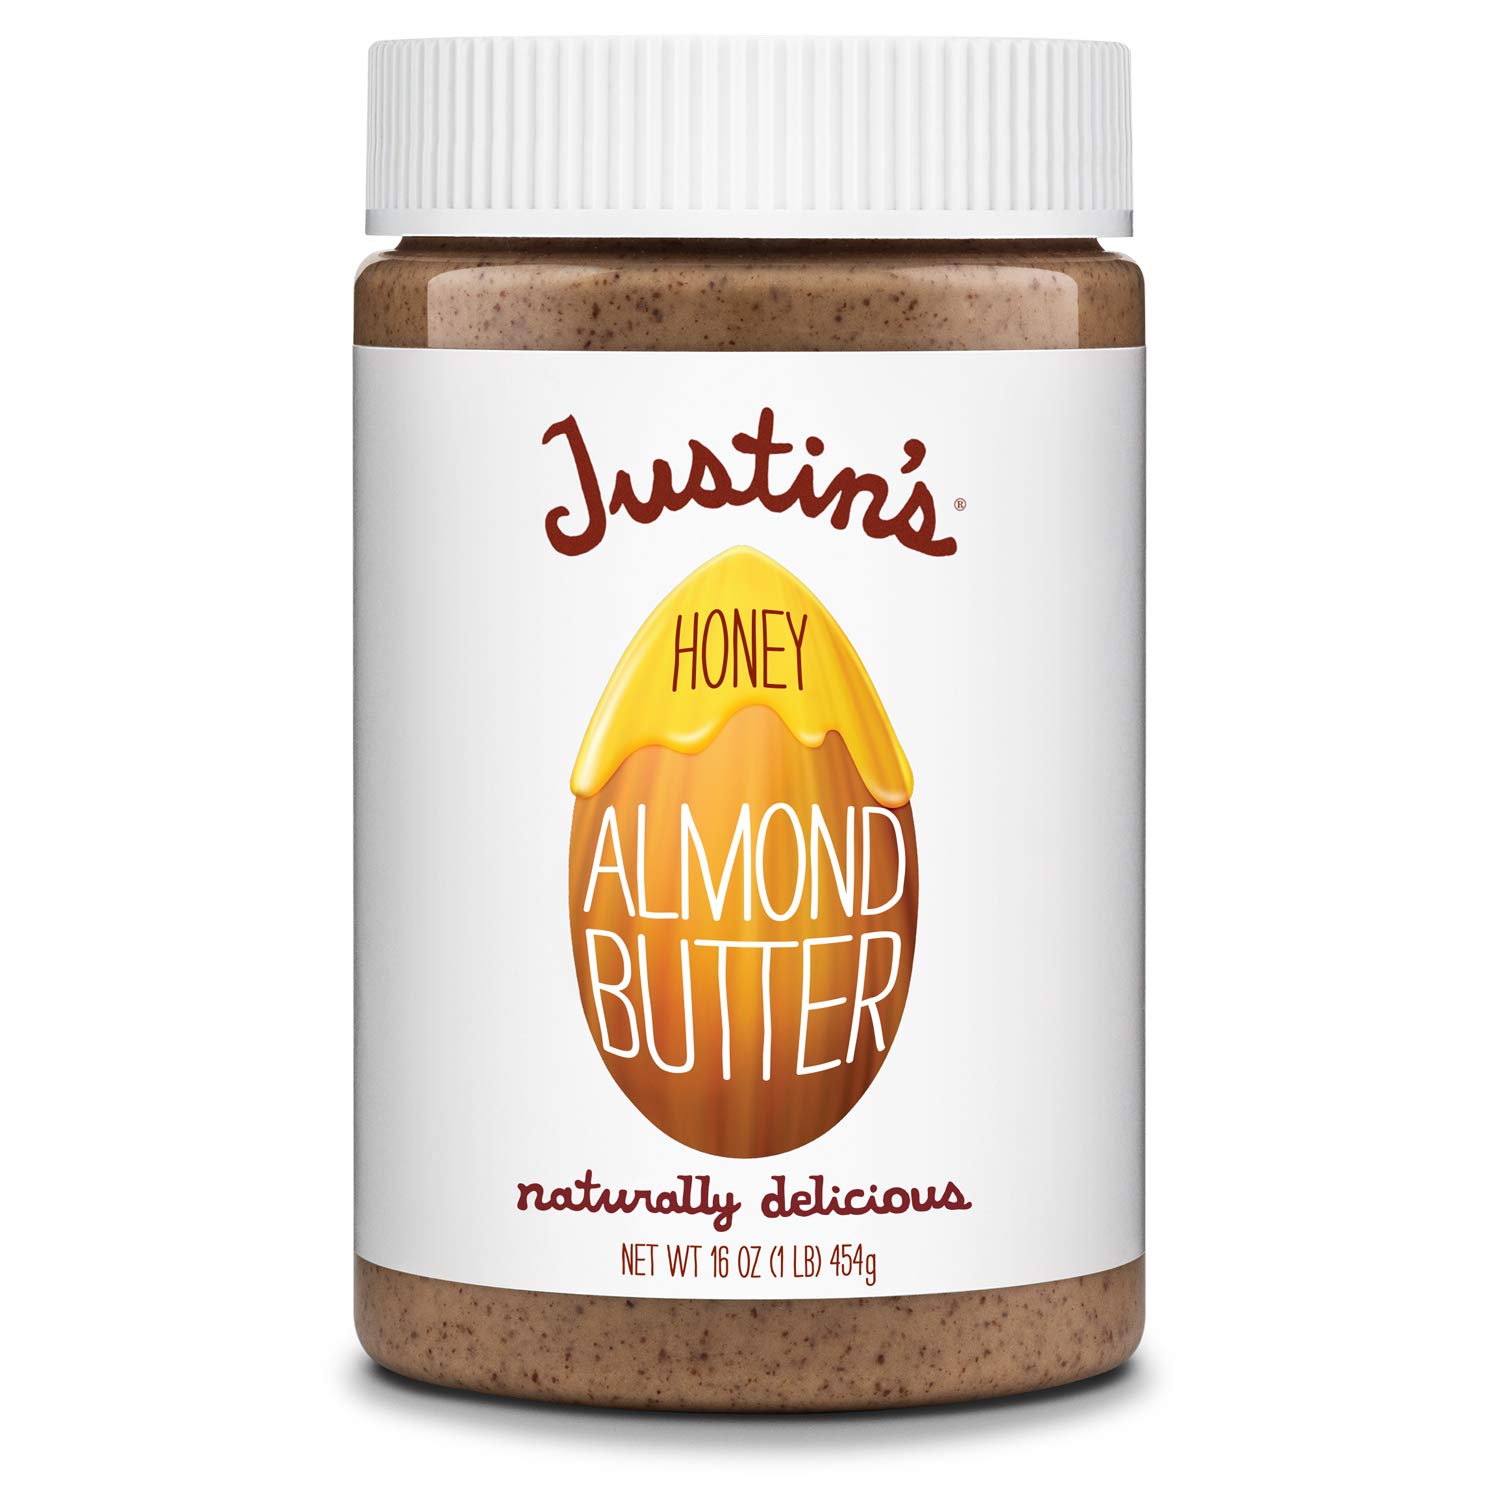 16-Oz Justin's No Stir Honey Almond Butter $4.09 w/ S&S + Free Shipping w/ Prime or on orders over $35